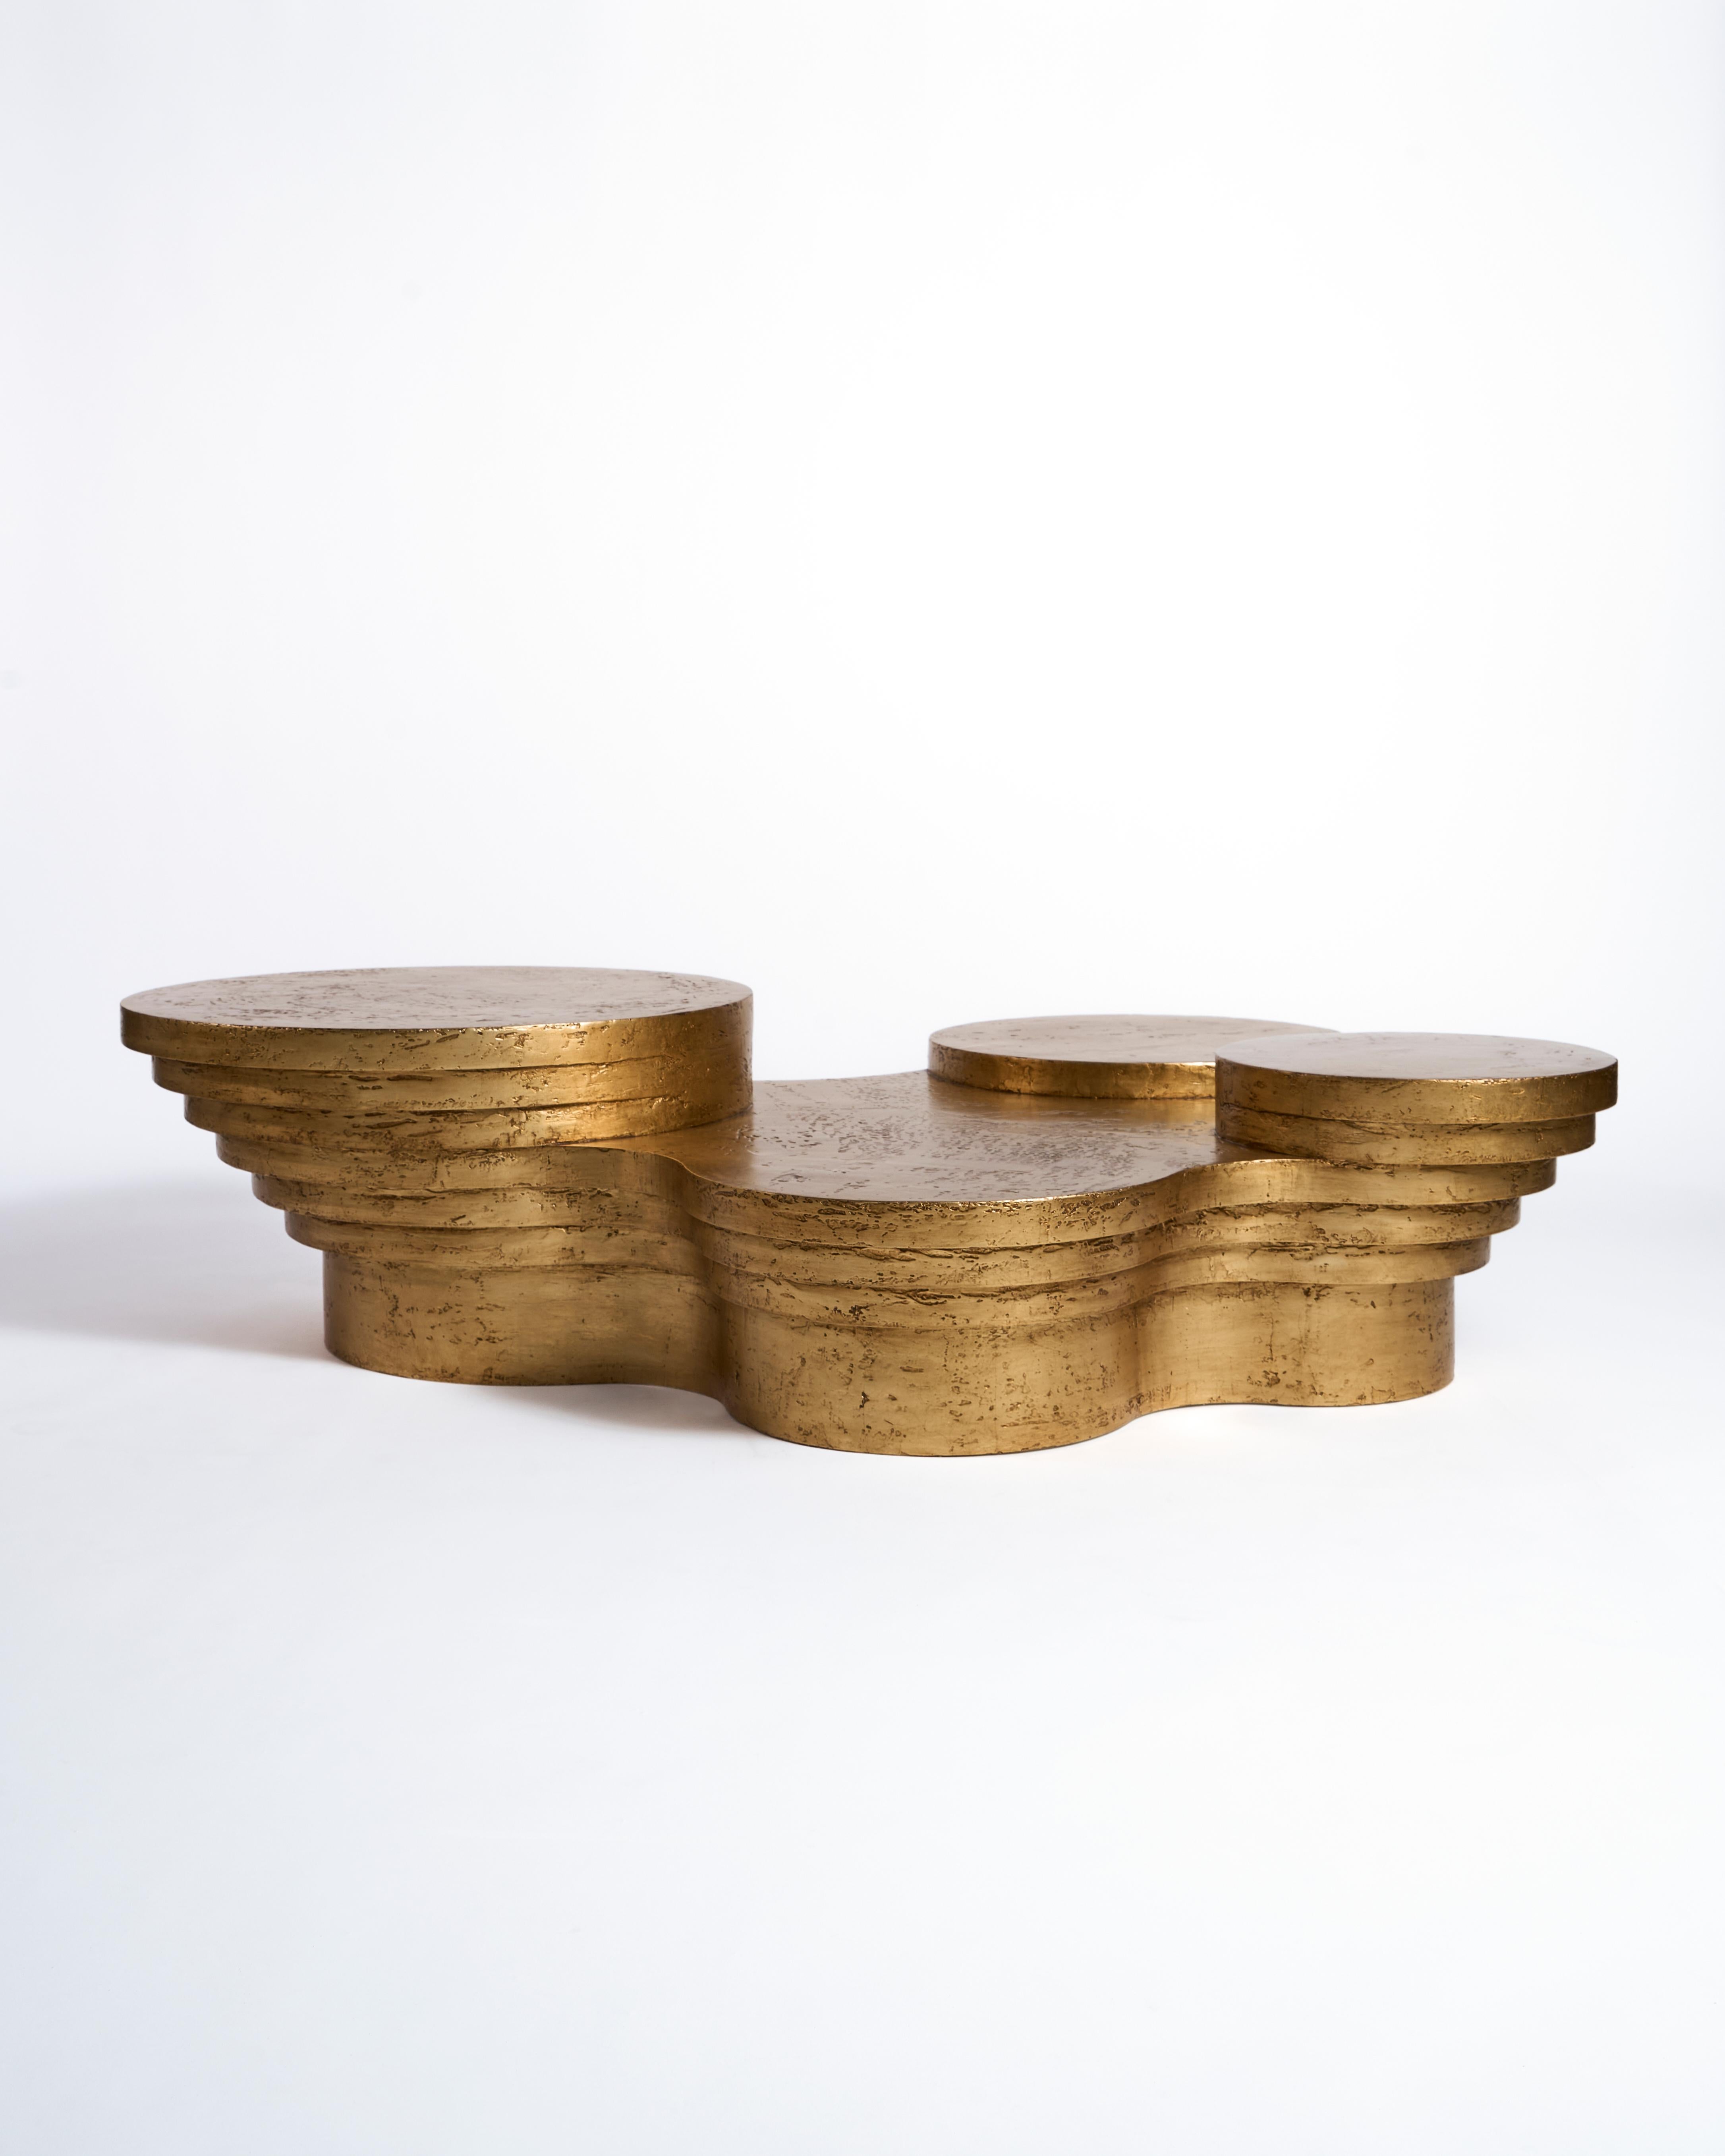 Slice me up sculptural coffee table by Pietro Franceschini.
Manufacturer: We Do.
Dimensions: W 160 x L 120 x H 36 cm.
Materials: Plaster, Golden Leaf.


Pietro Franceschini is an architect and designer based in New York and Florence. He was educated